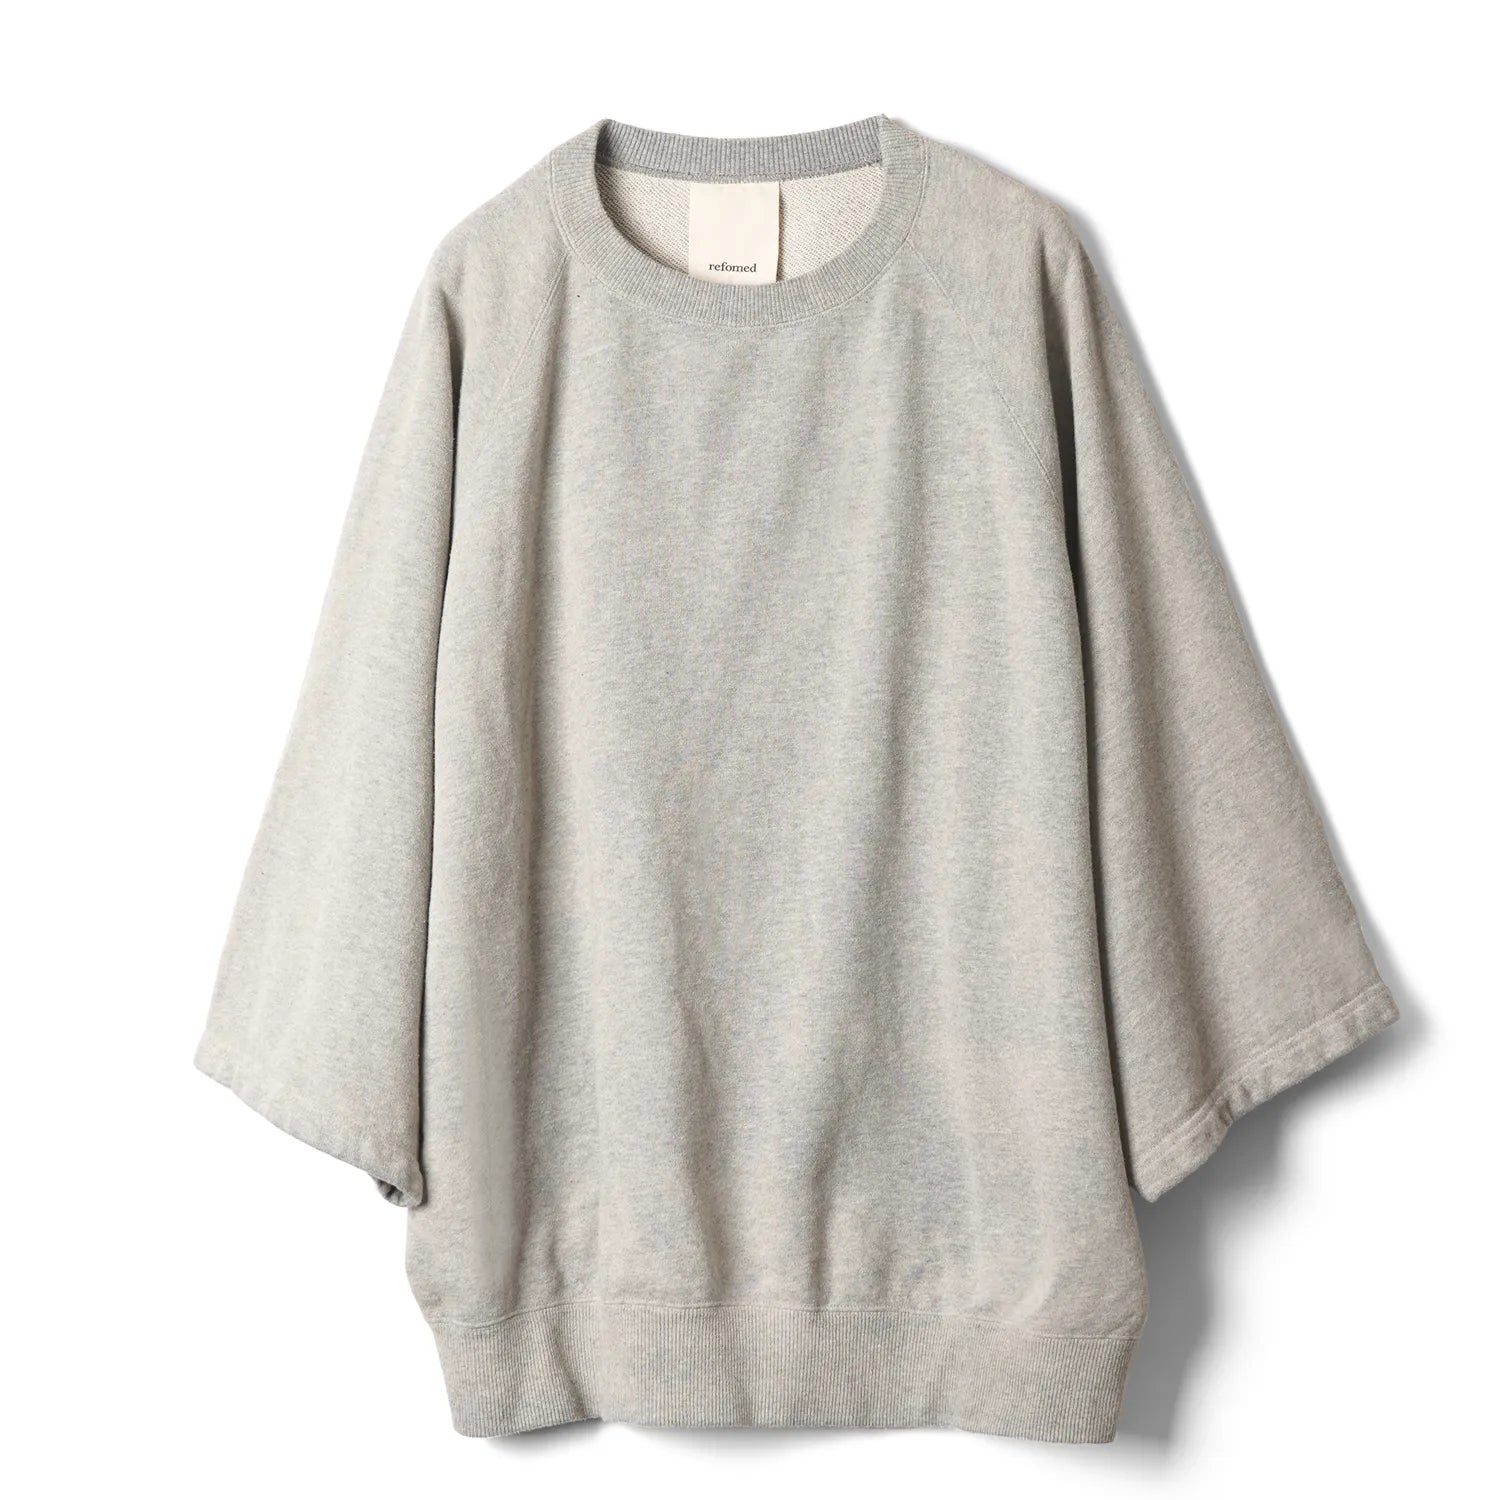 refomed / 10WASH S/S SWEATER (RECU-012)